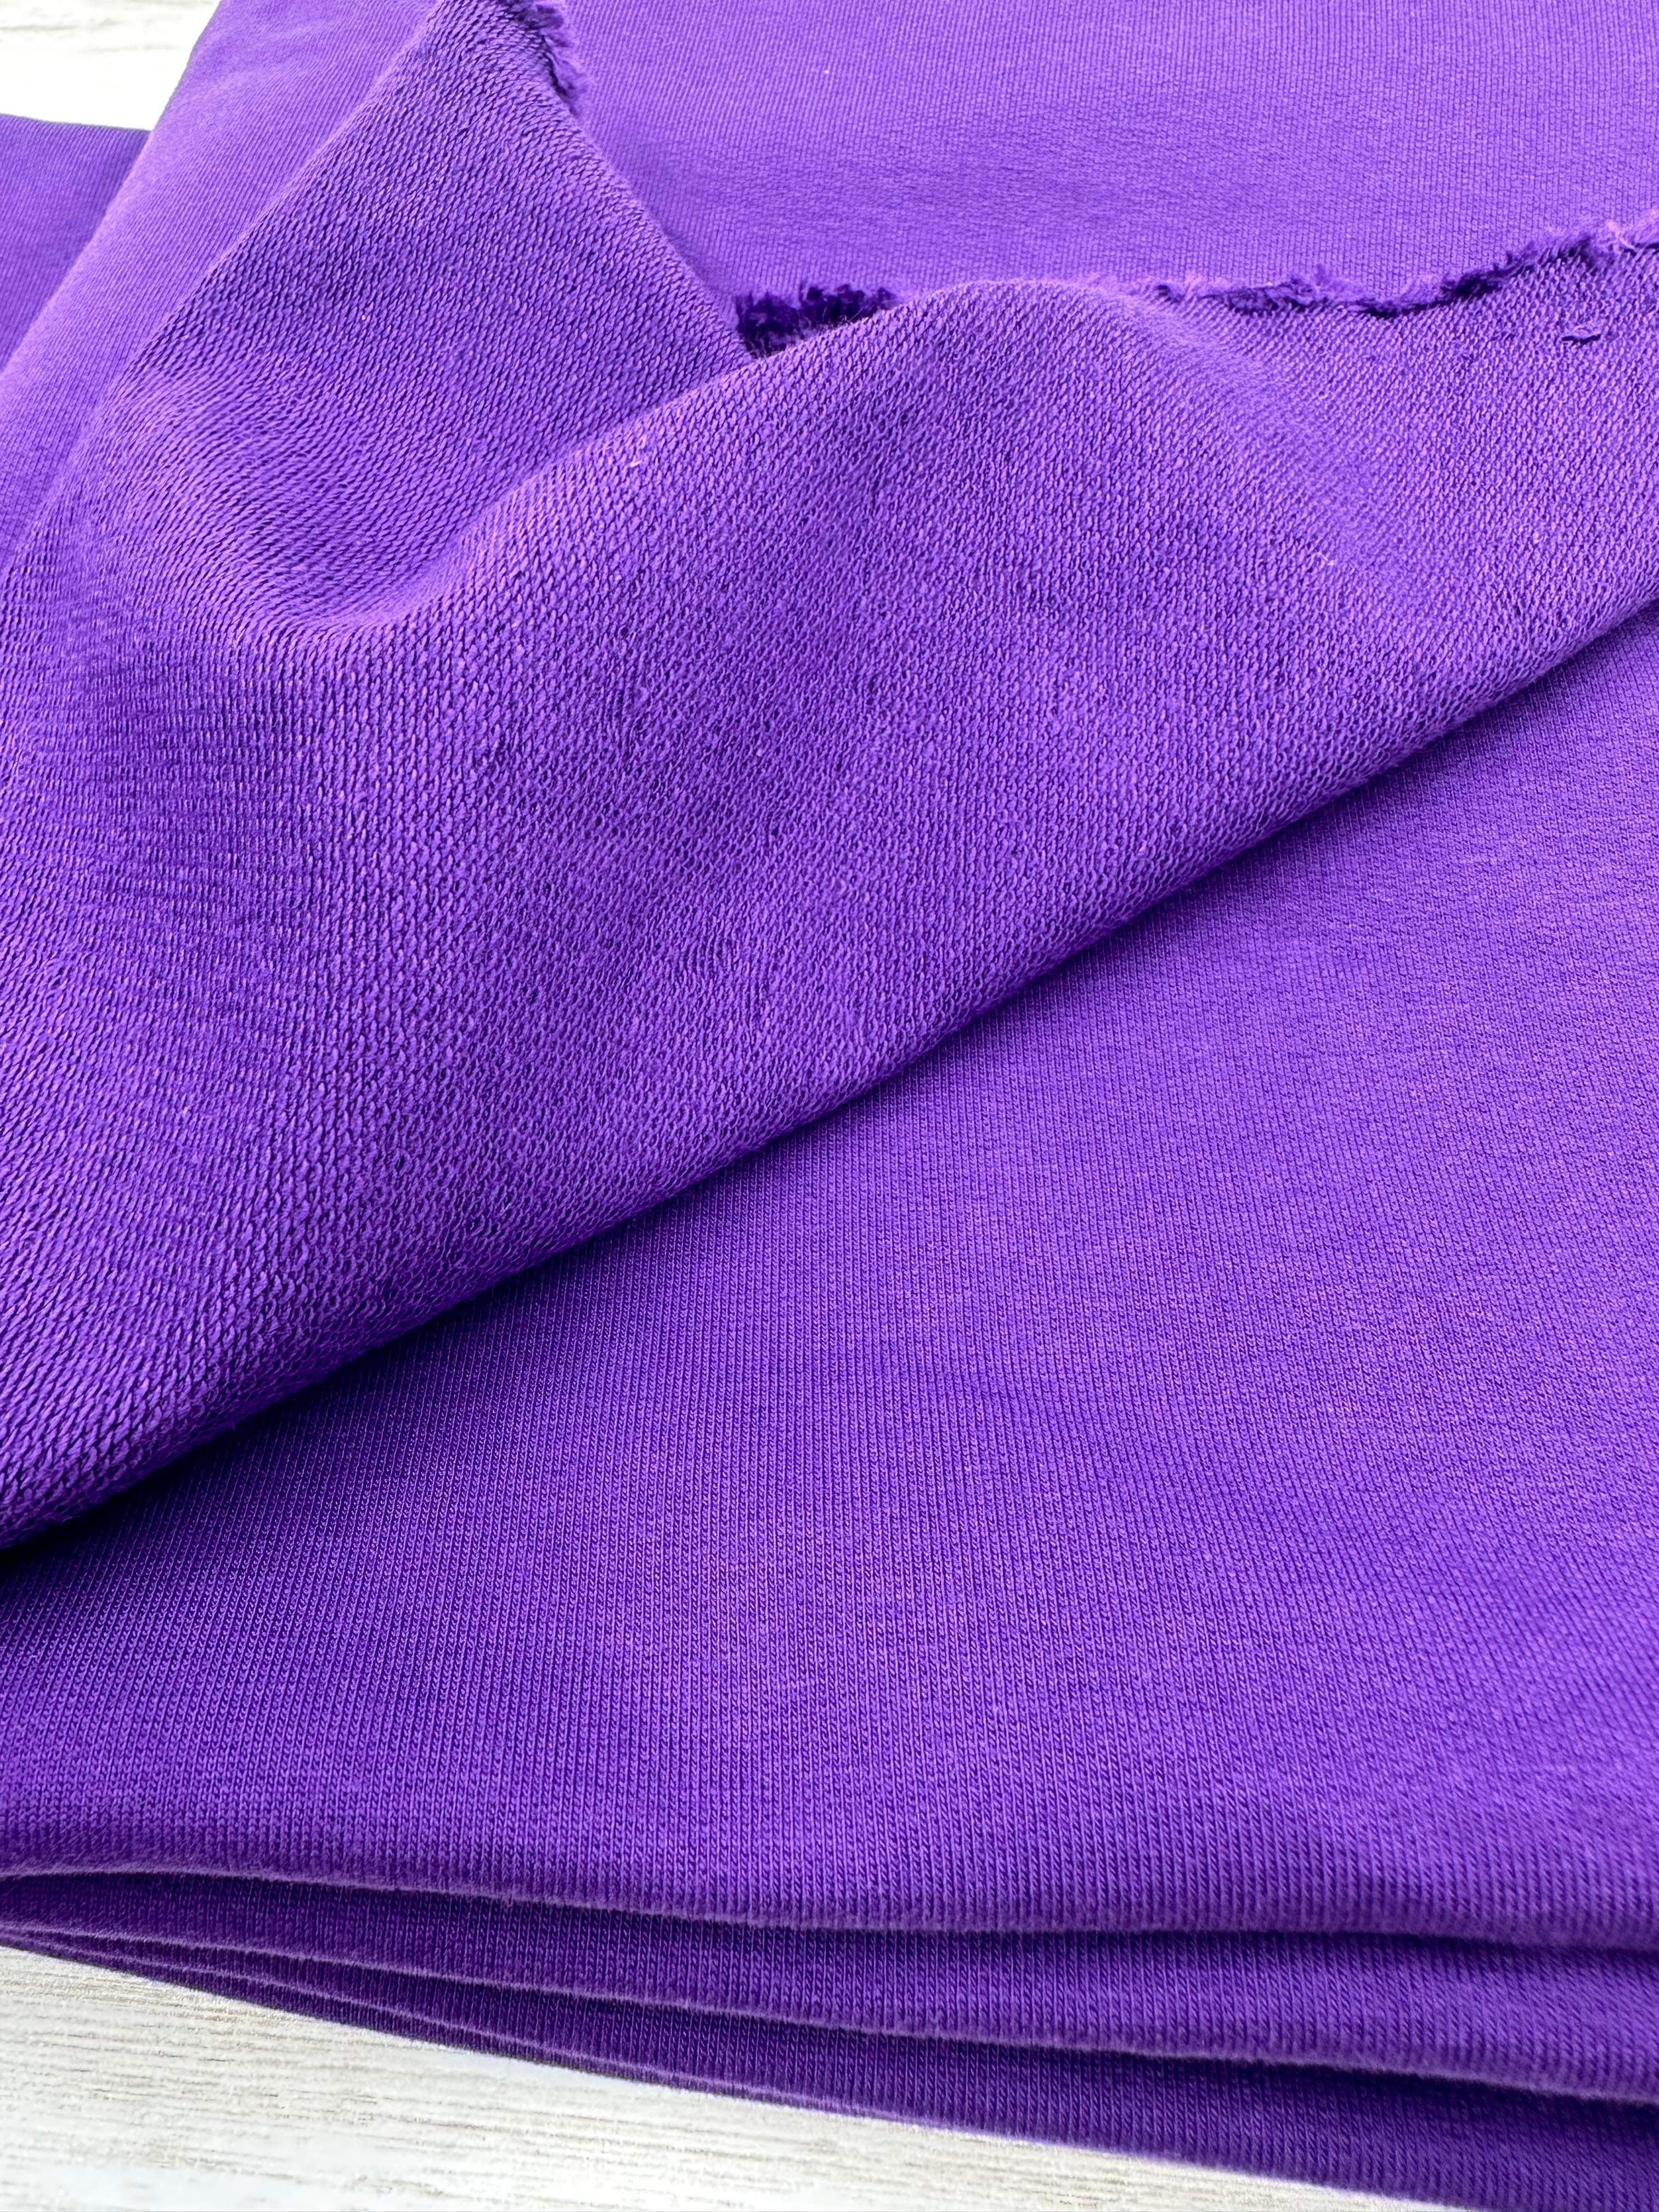 French Terry - Purple